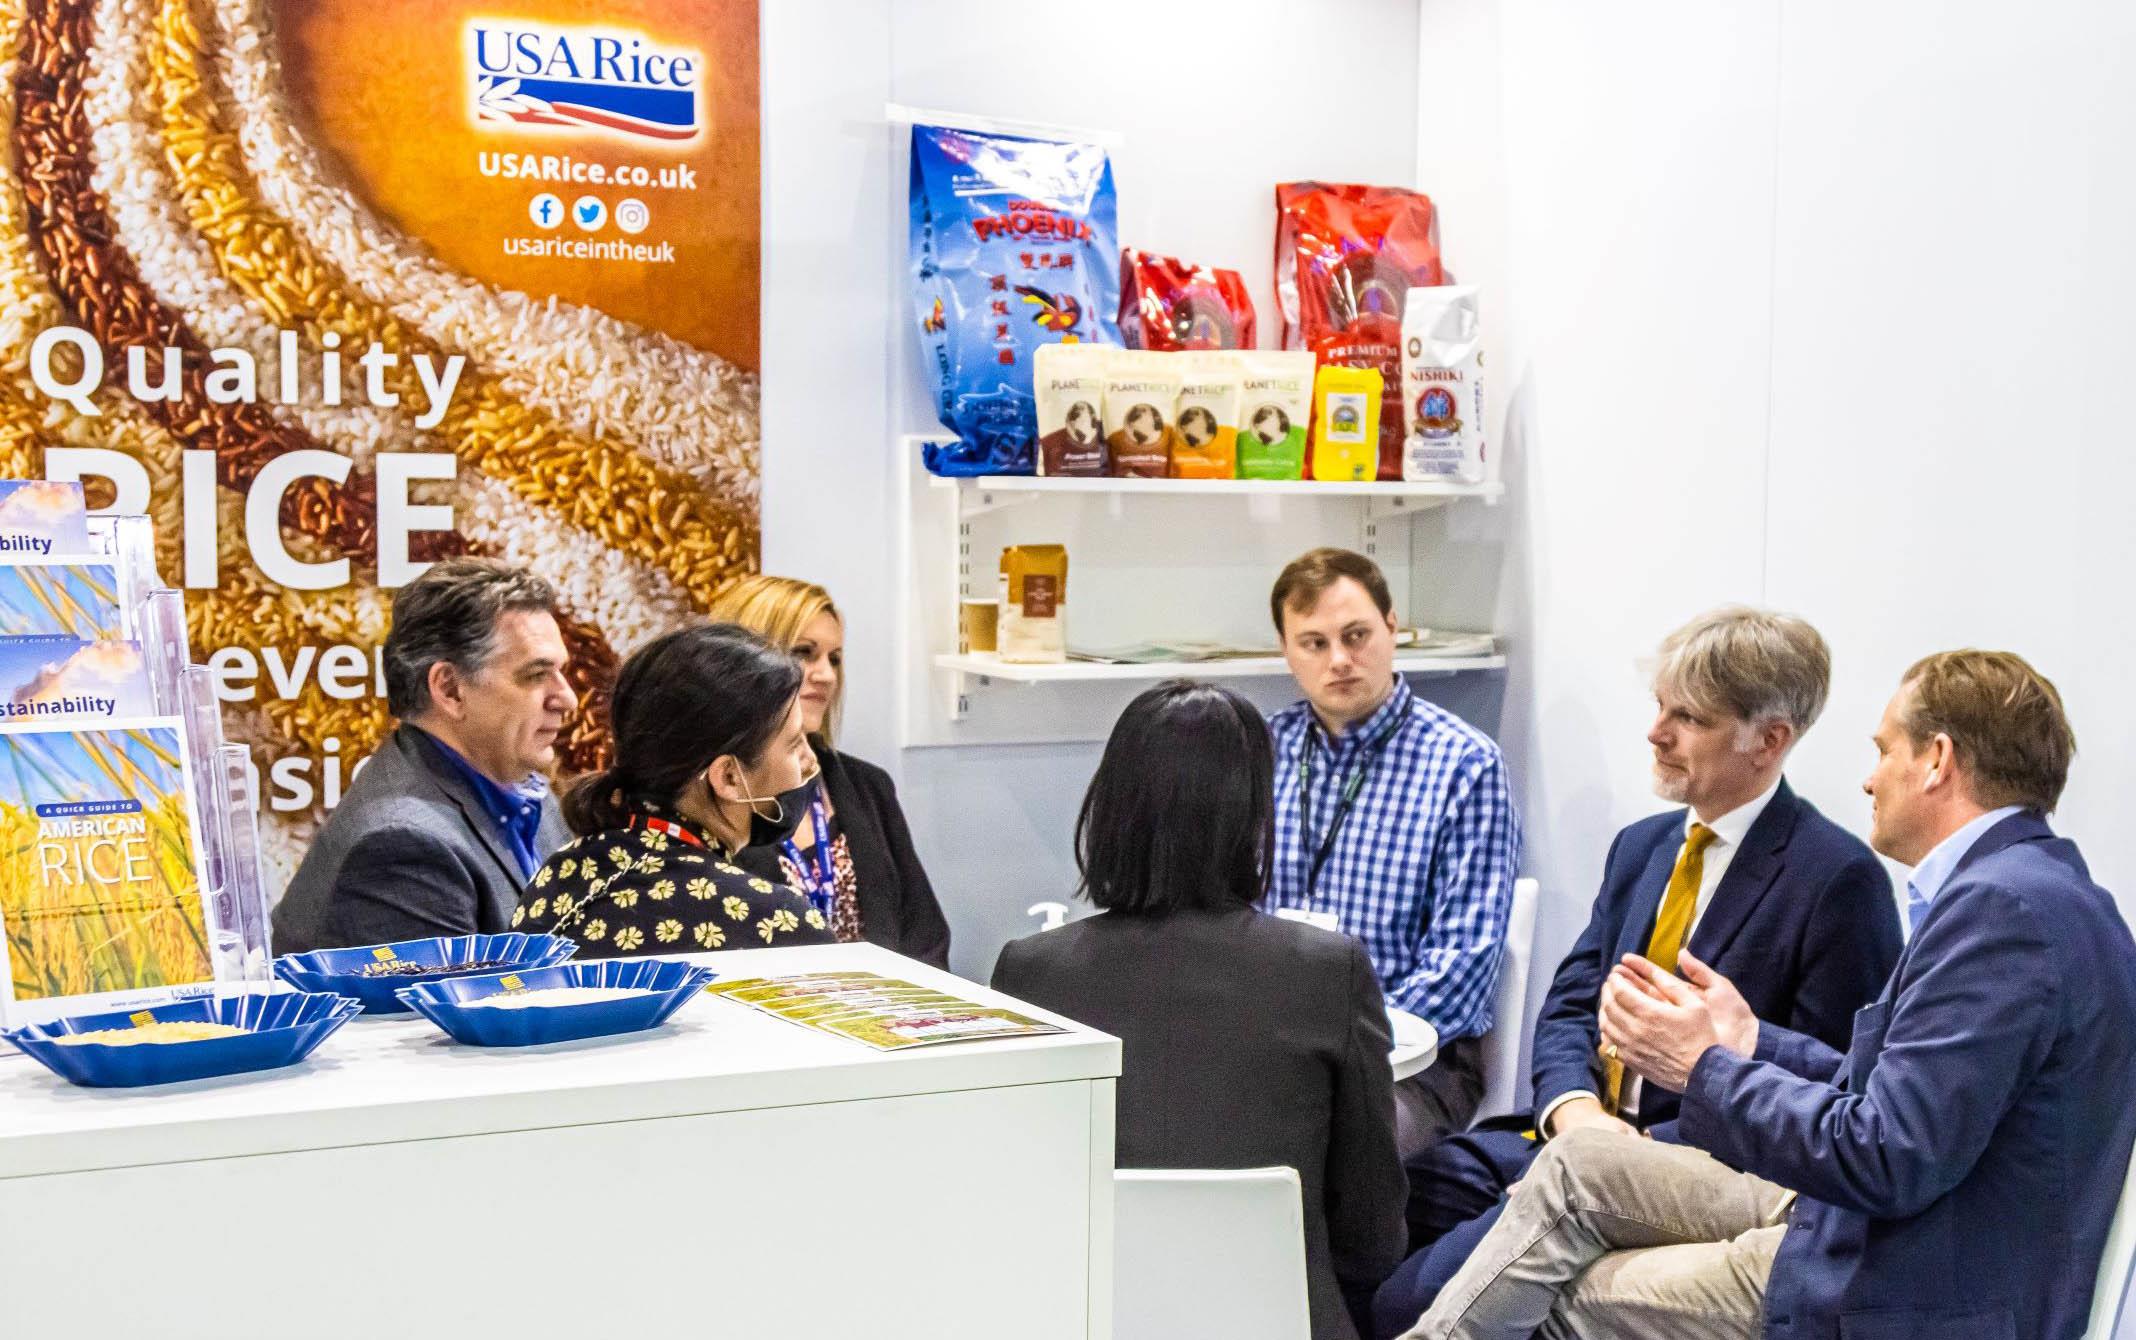 Group of people seated in trade show booth in front of rice poster, samples, and pamphlets